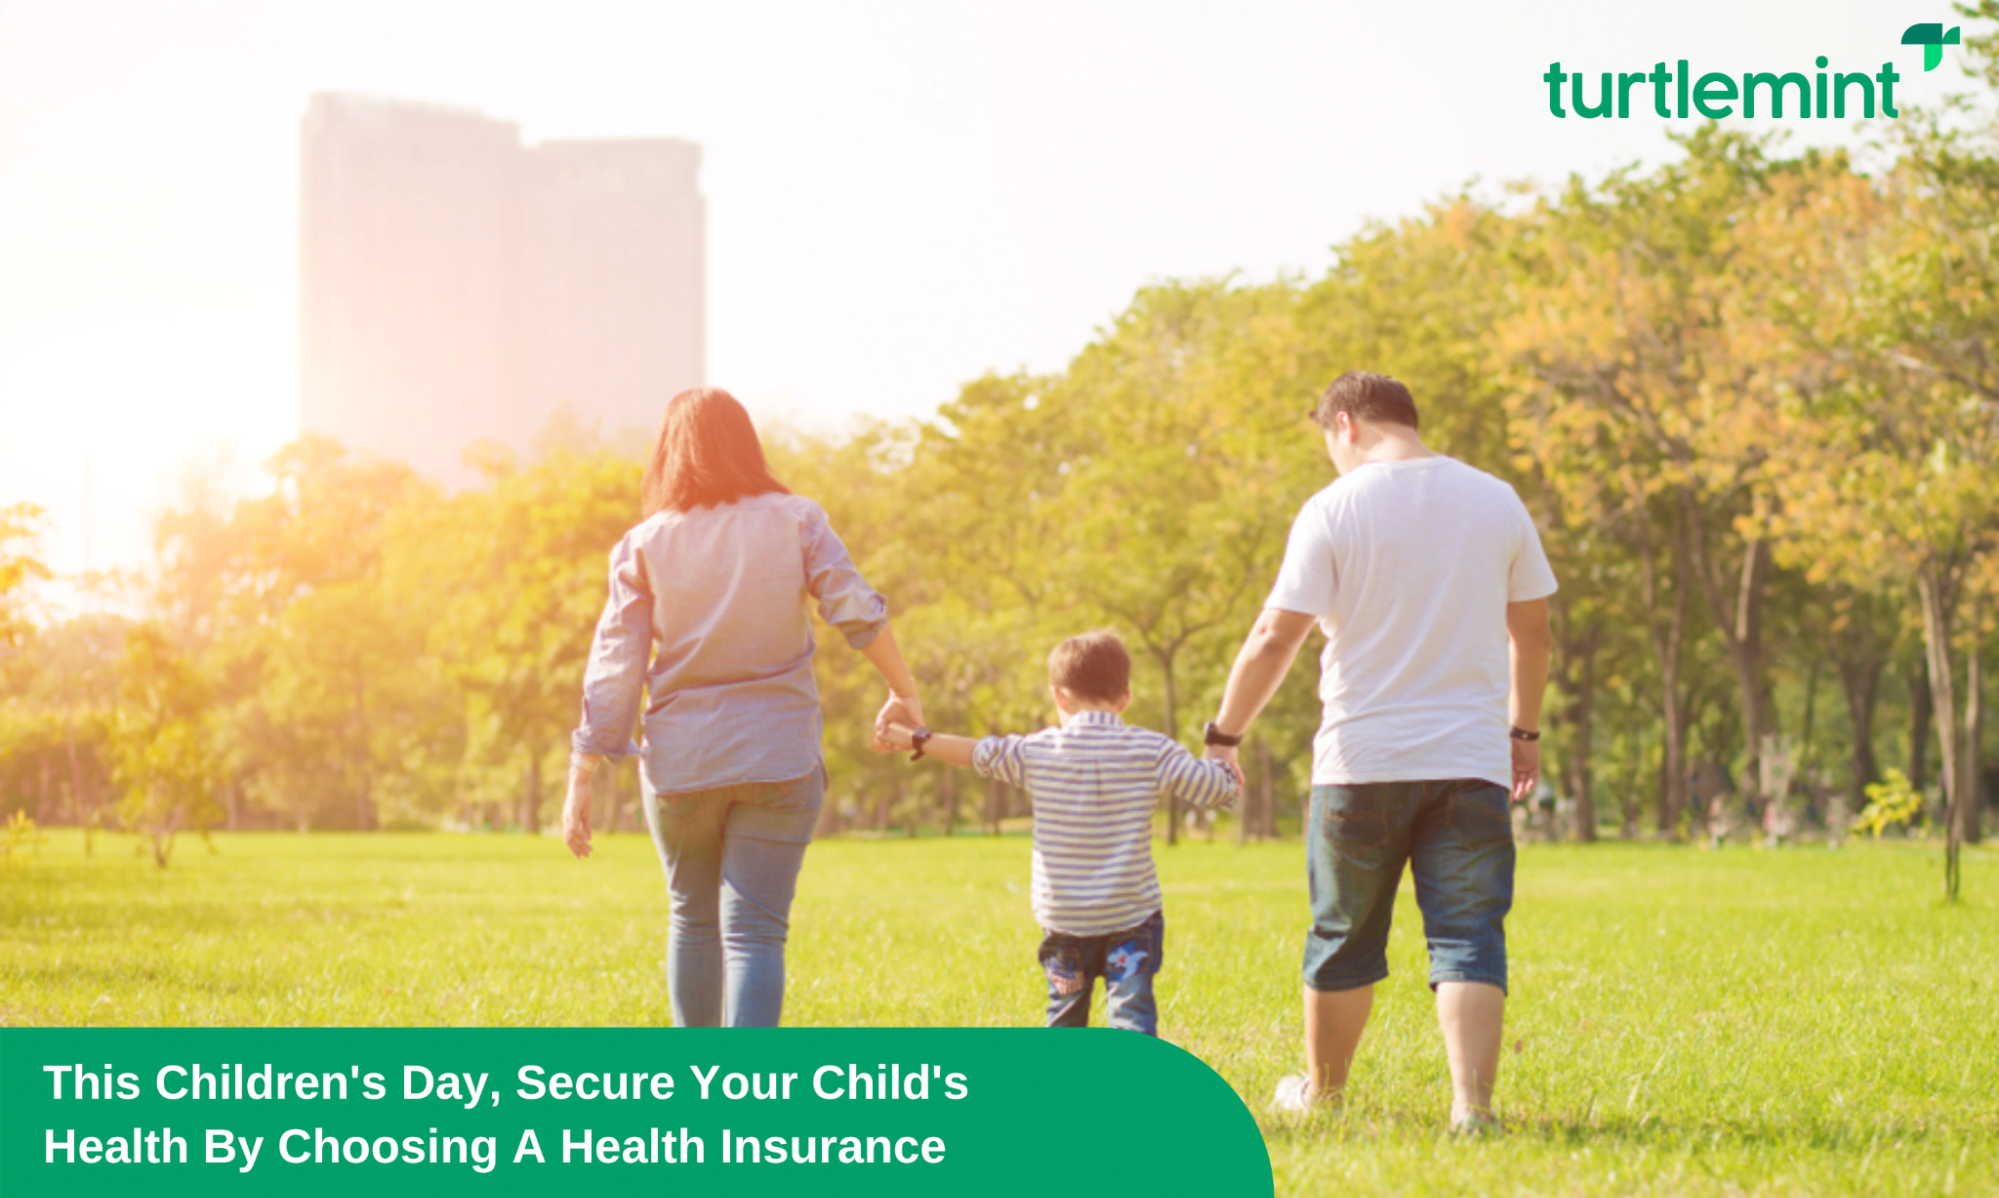 This Children's Day, Secure Your Child's Health By Choosing A Health Insurance